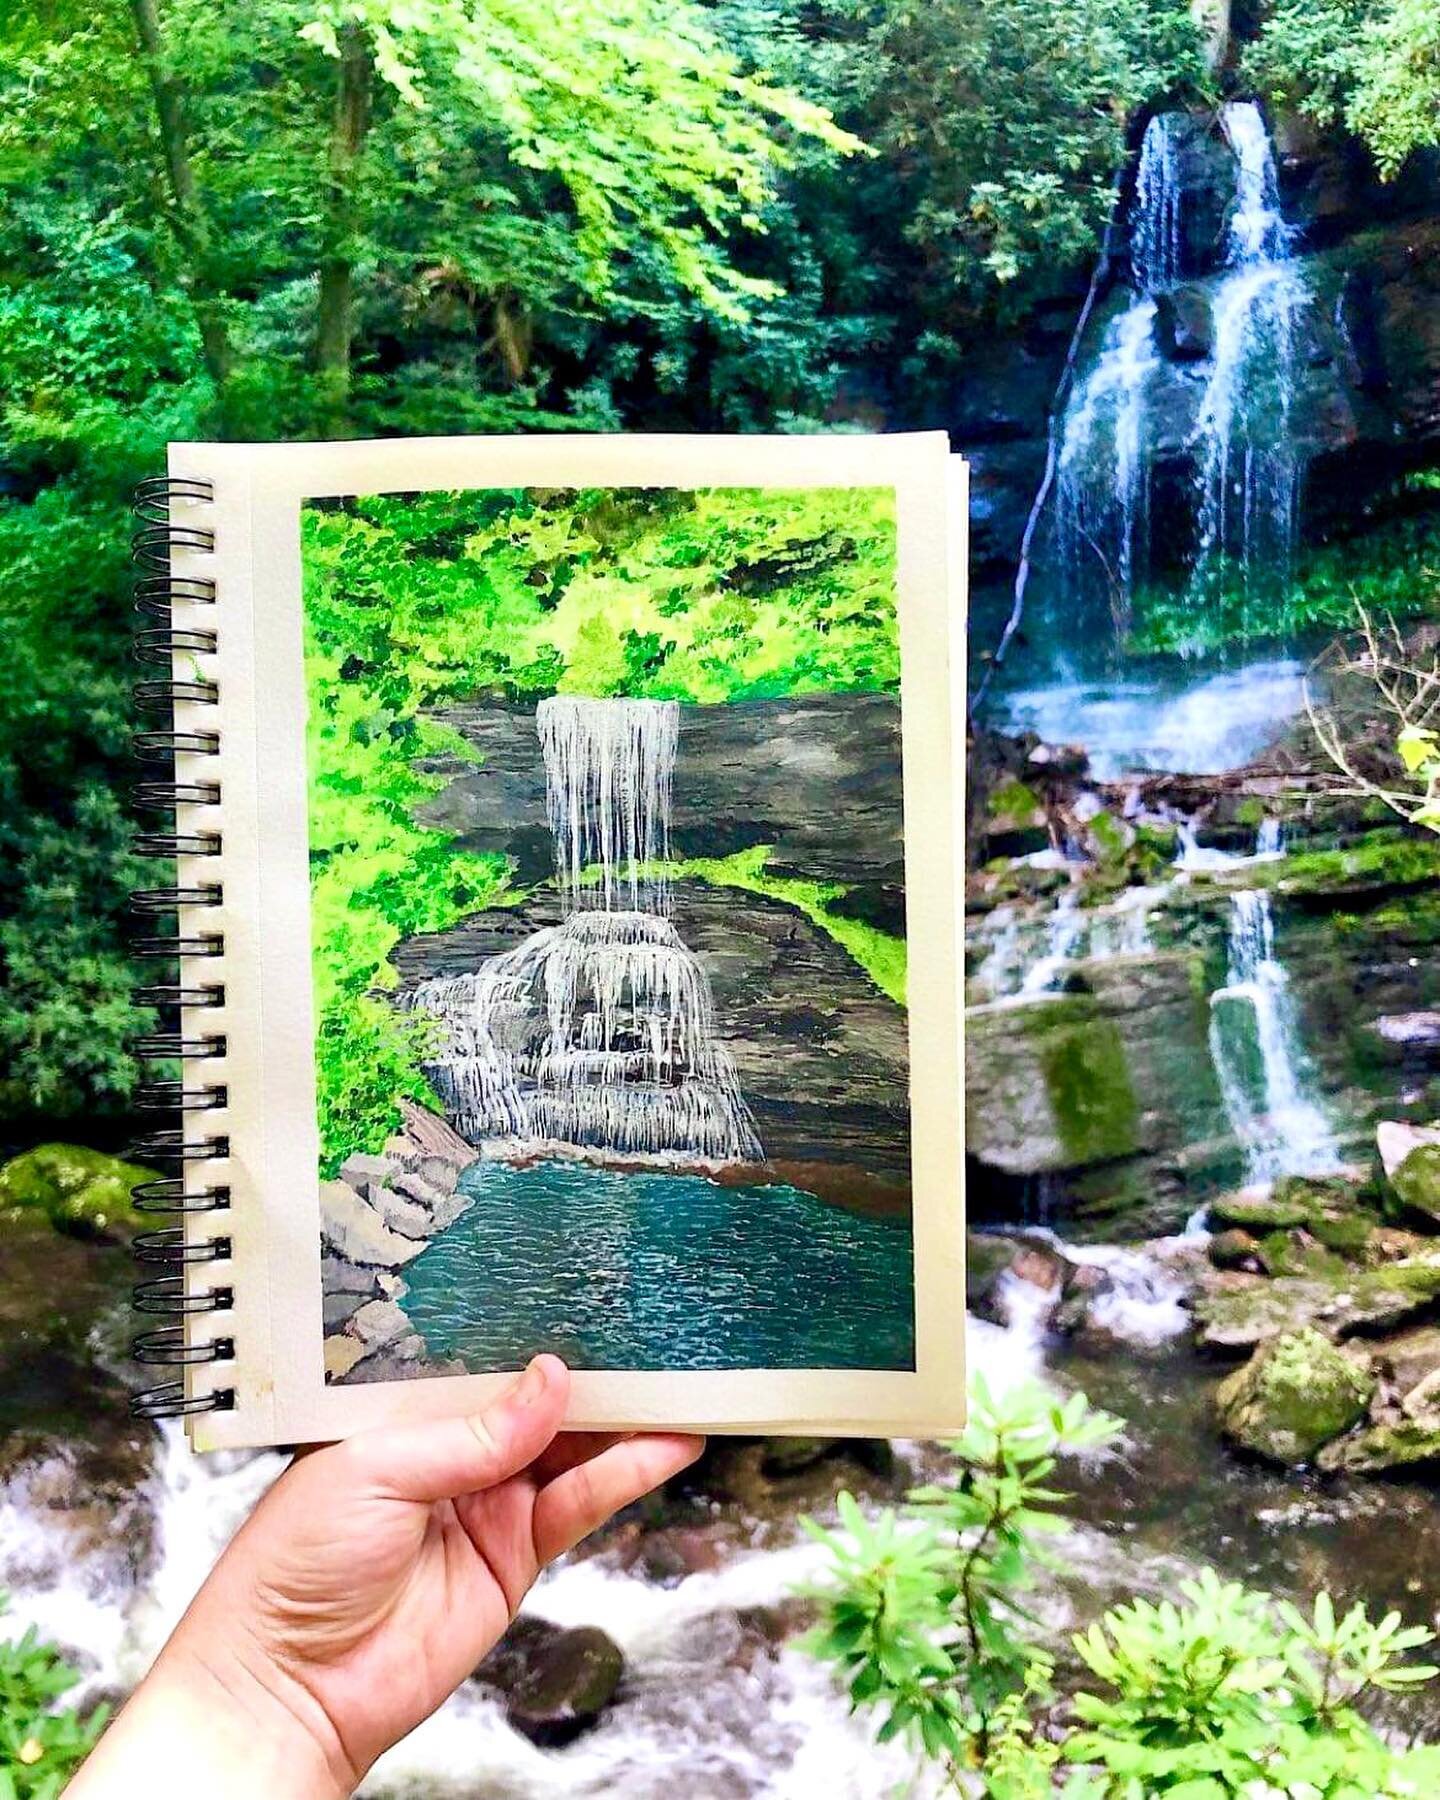 ✨the cascades✨

virginia has so many beautiful waterfalls and I want to paint them all 🌿🍄 

these falls are along the cascades trail in giles county, which is one of my favorite trails in the state. the trail follows along a cascading mountain stre